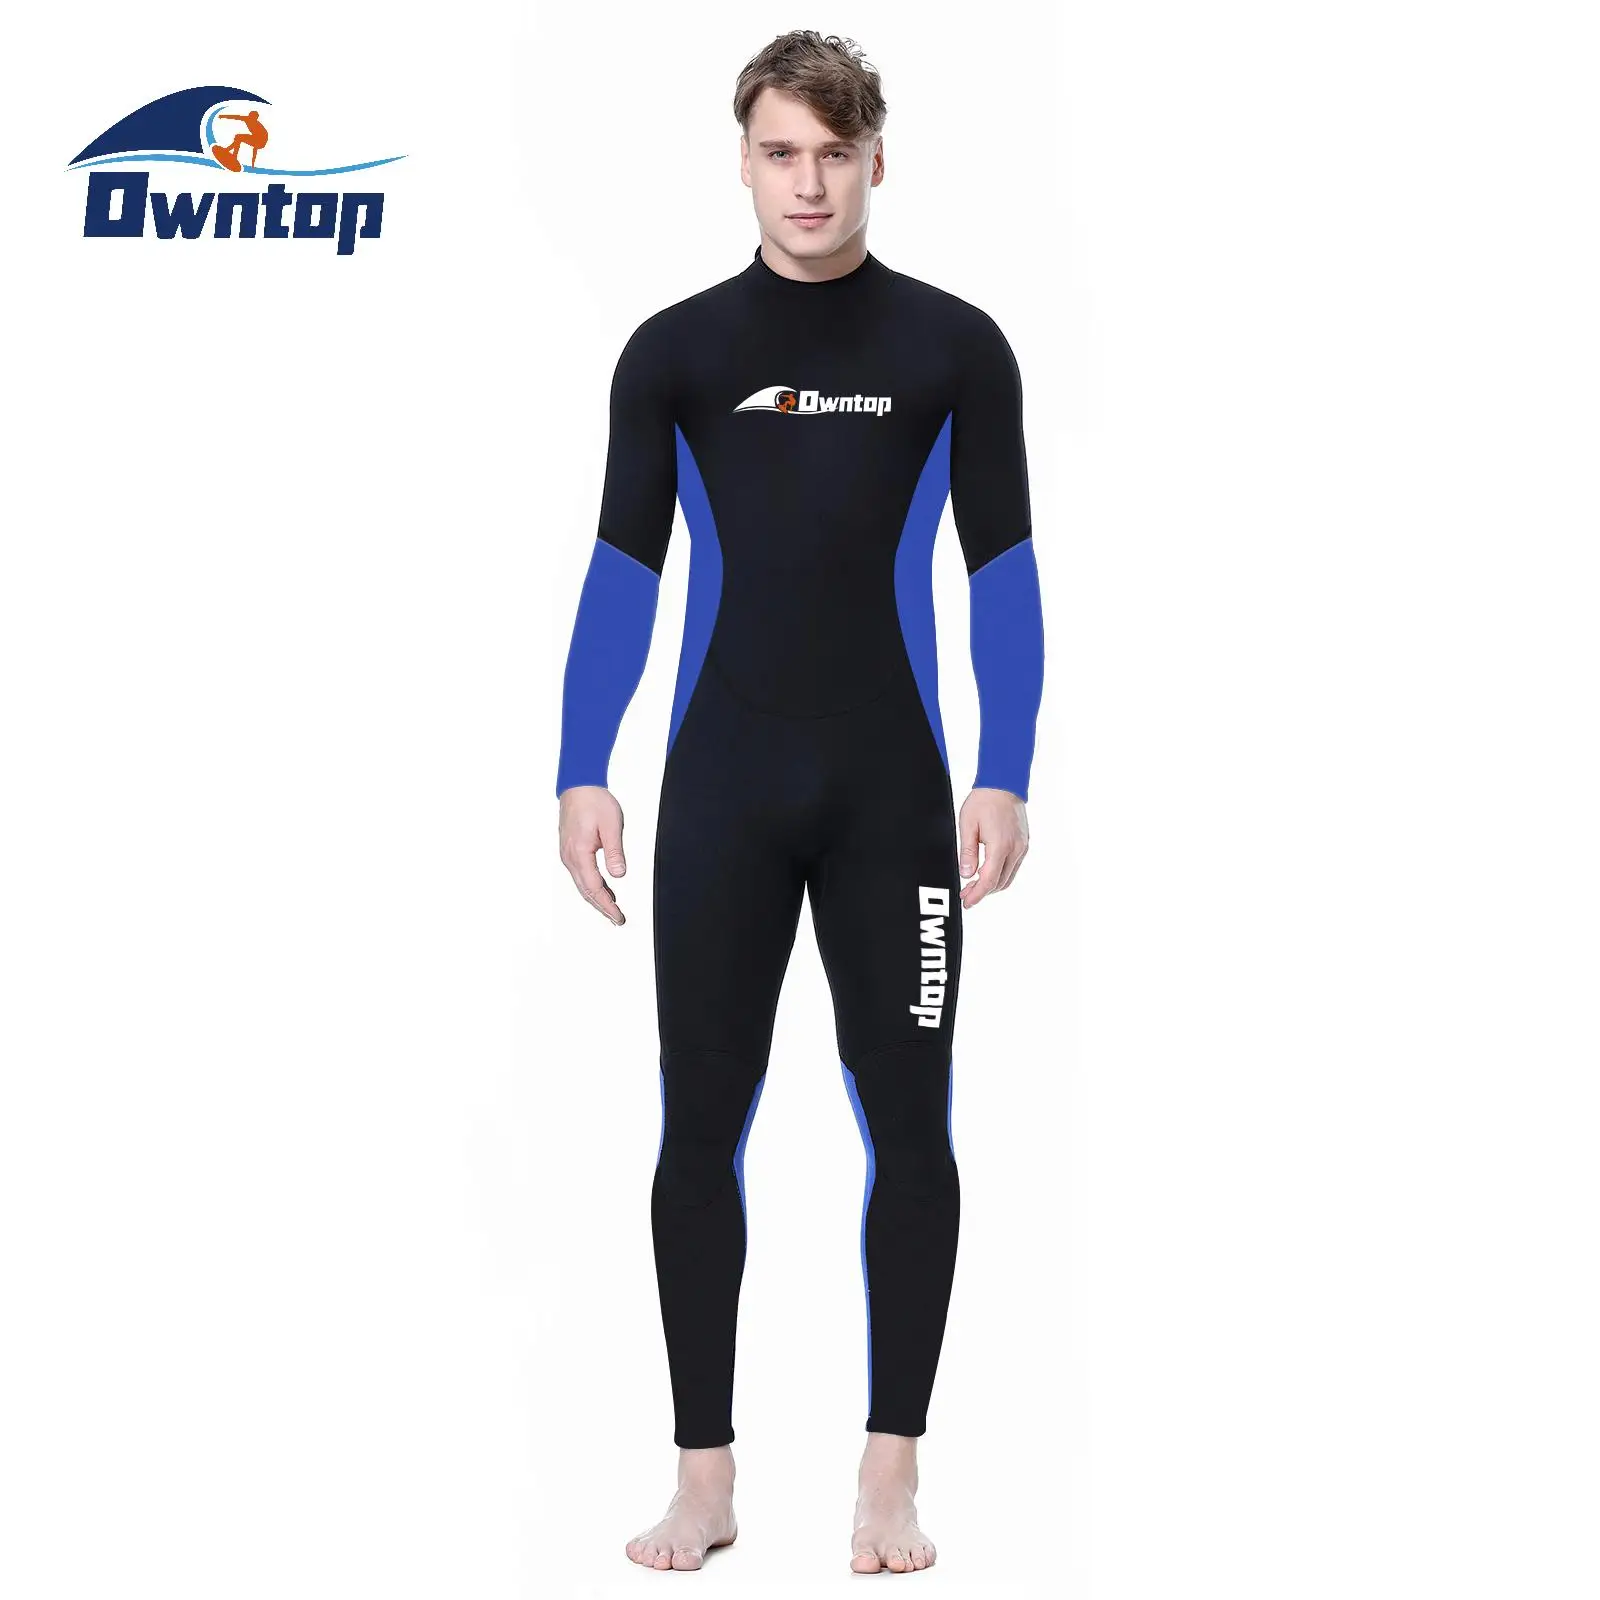 

3mm Back Zip Neoprene Snorkeling Swimming Suit Diving Surfing Wetsuit for Men, Picture shows/customization